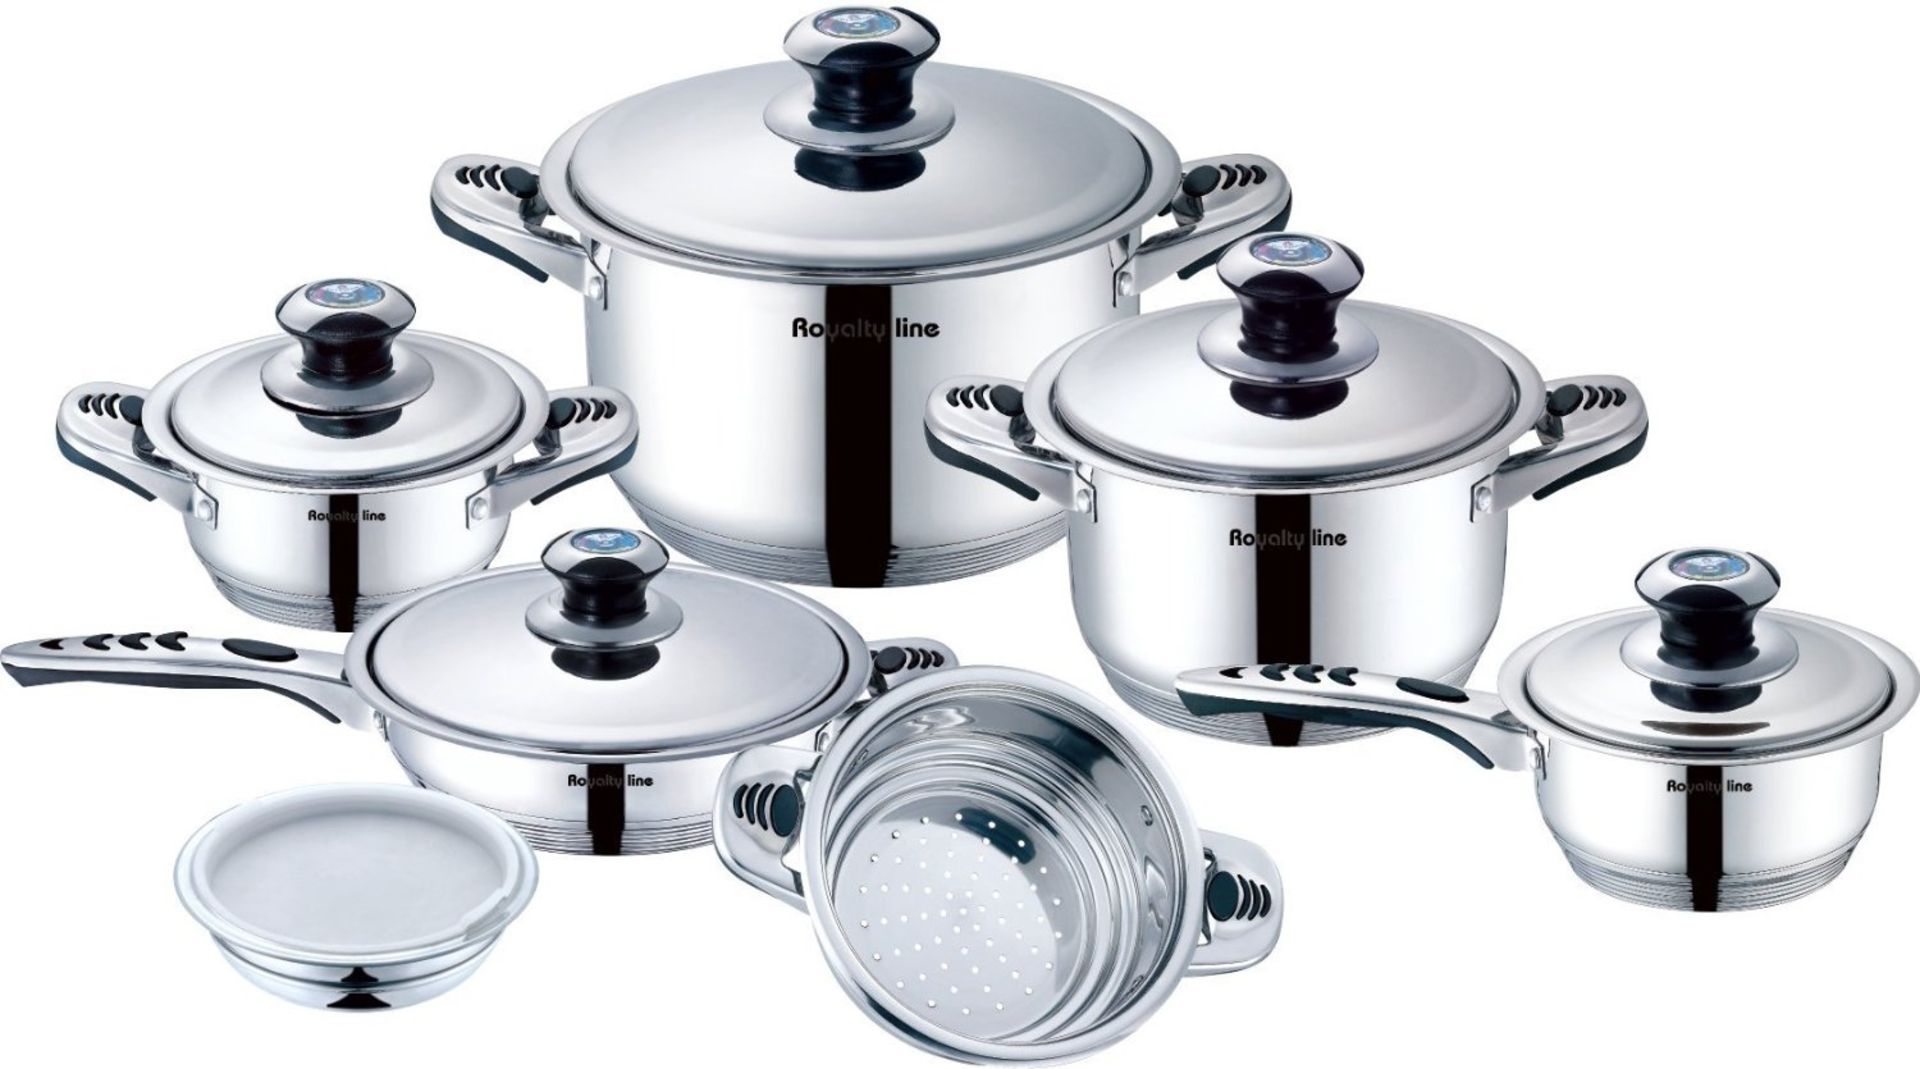 V Brand New Royalty Line 16 Piece Stainless Steel Saucepan Set Suitable For Induction, Electric, Gas